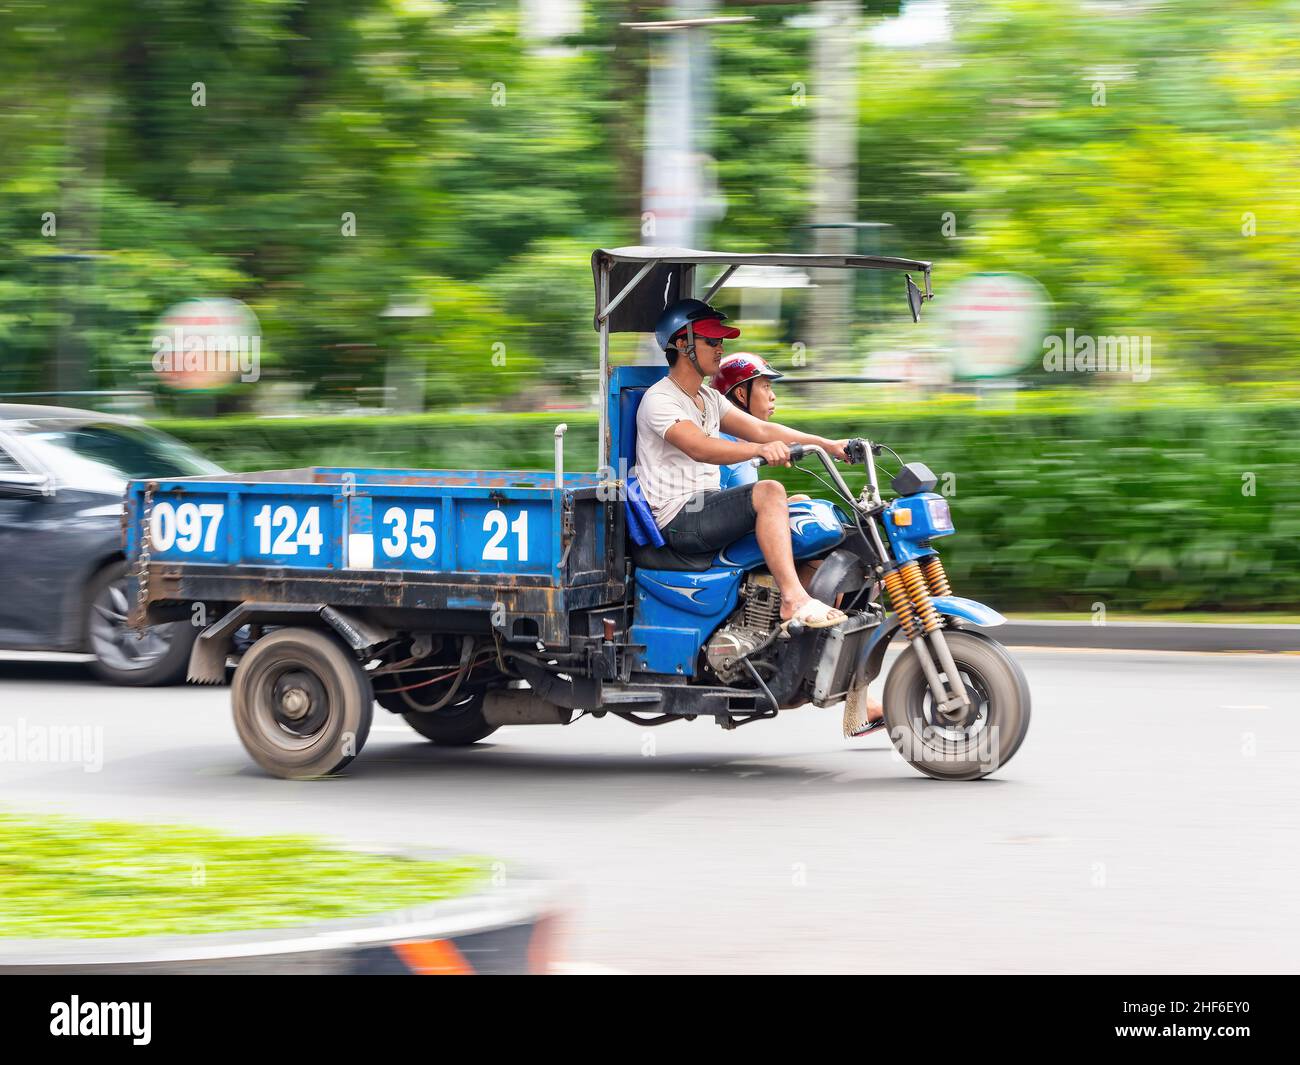 Motorcycle based truck at speed in Ho Chi Minh City, Vietnam. The photo has motion blur, with the driver sharp in focus. Stock Photo